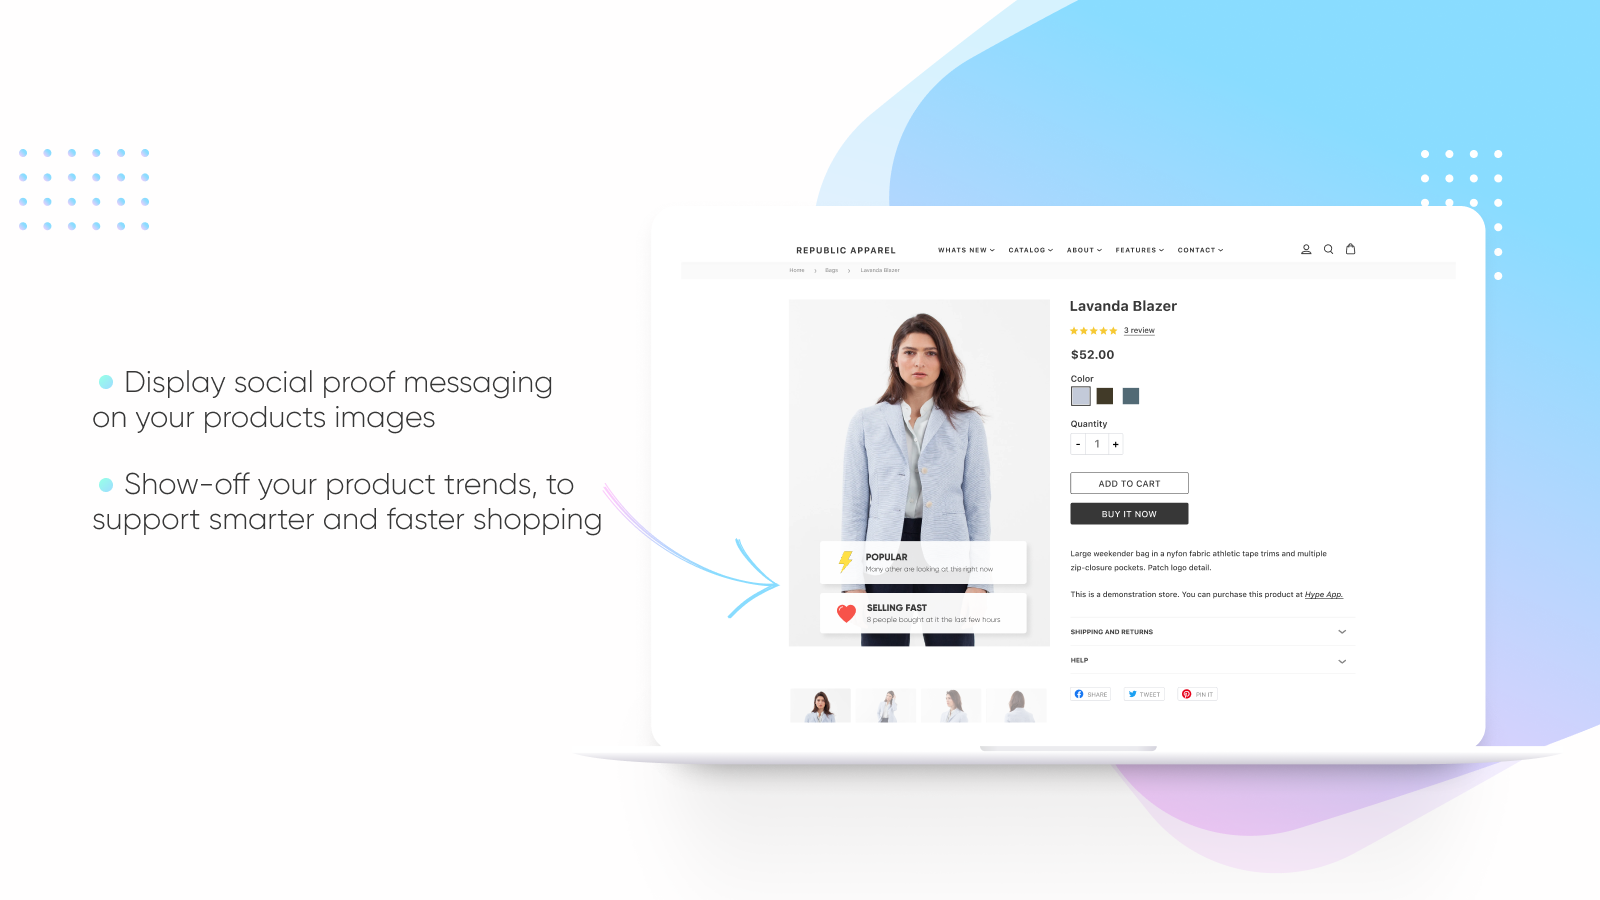 Display social proof messaging on product images